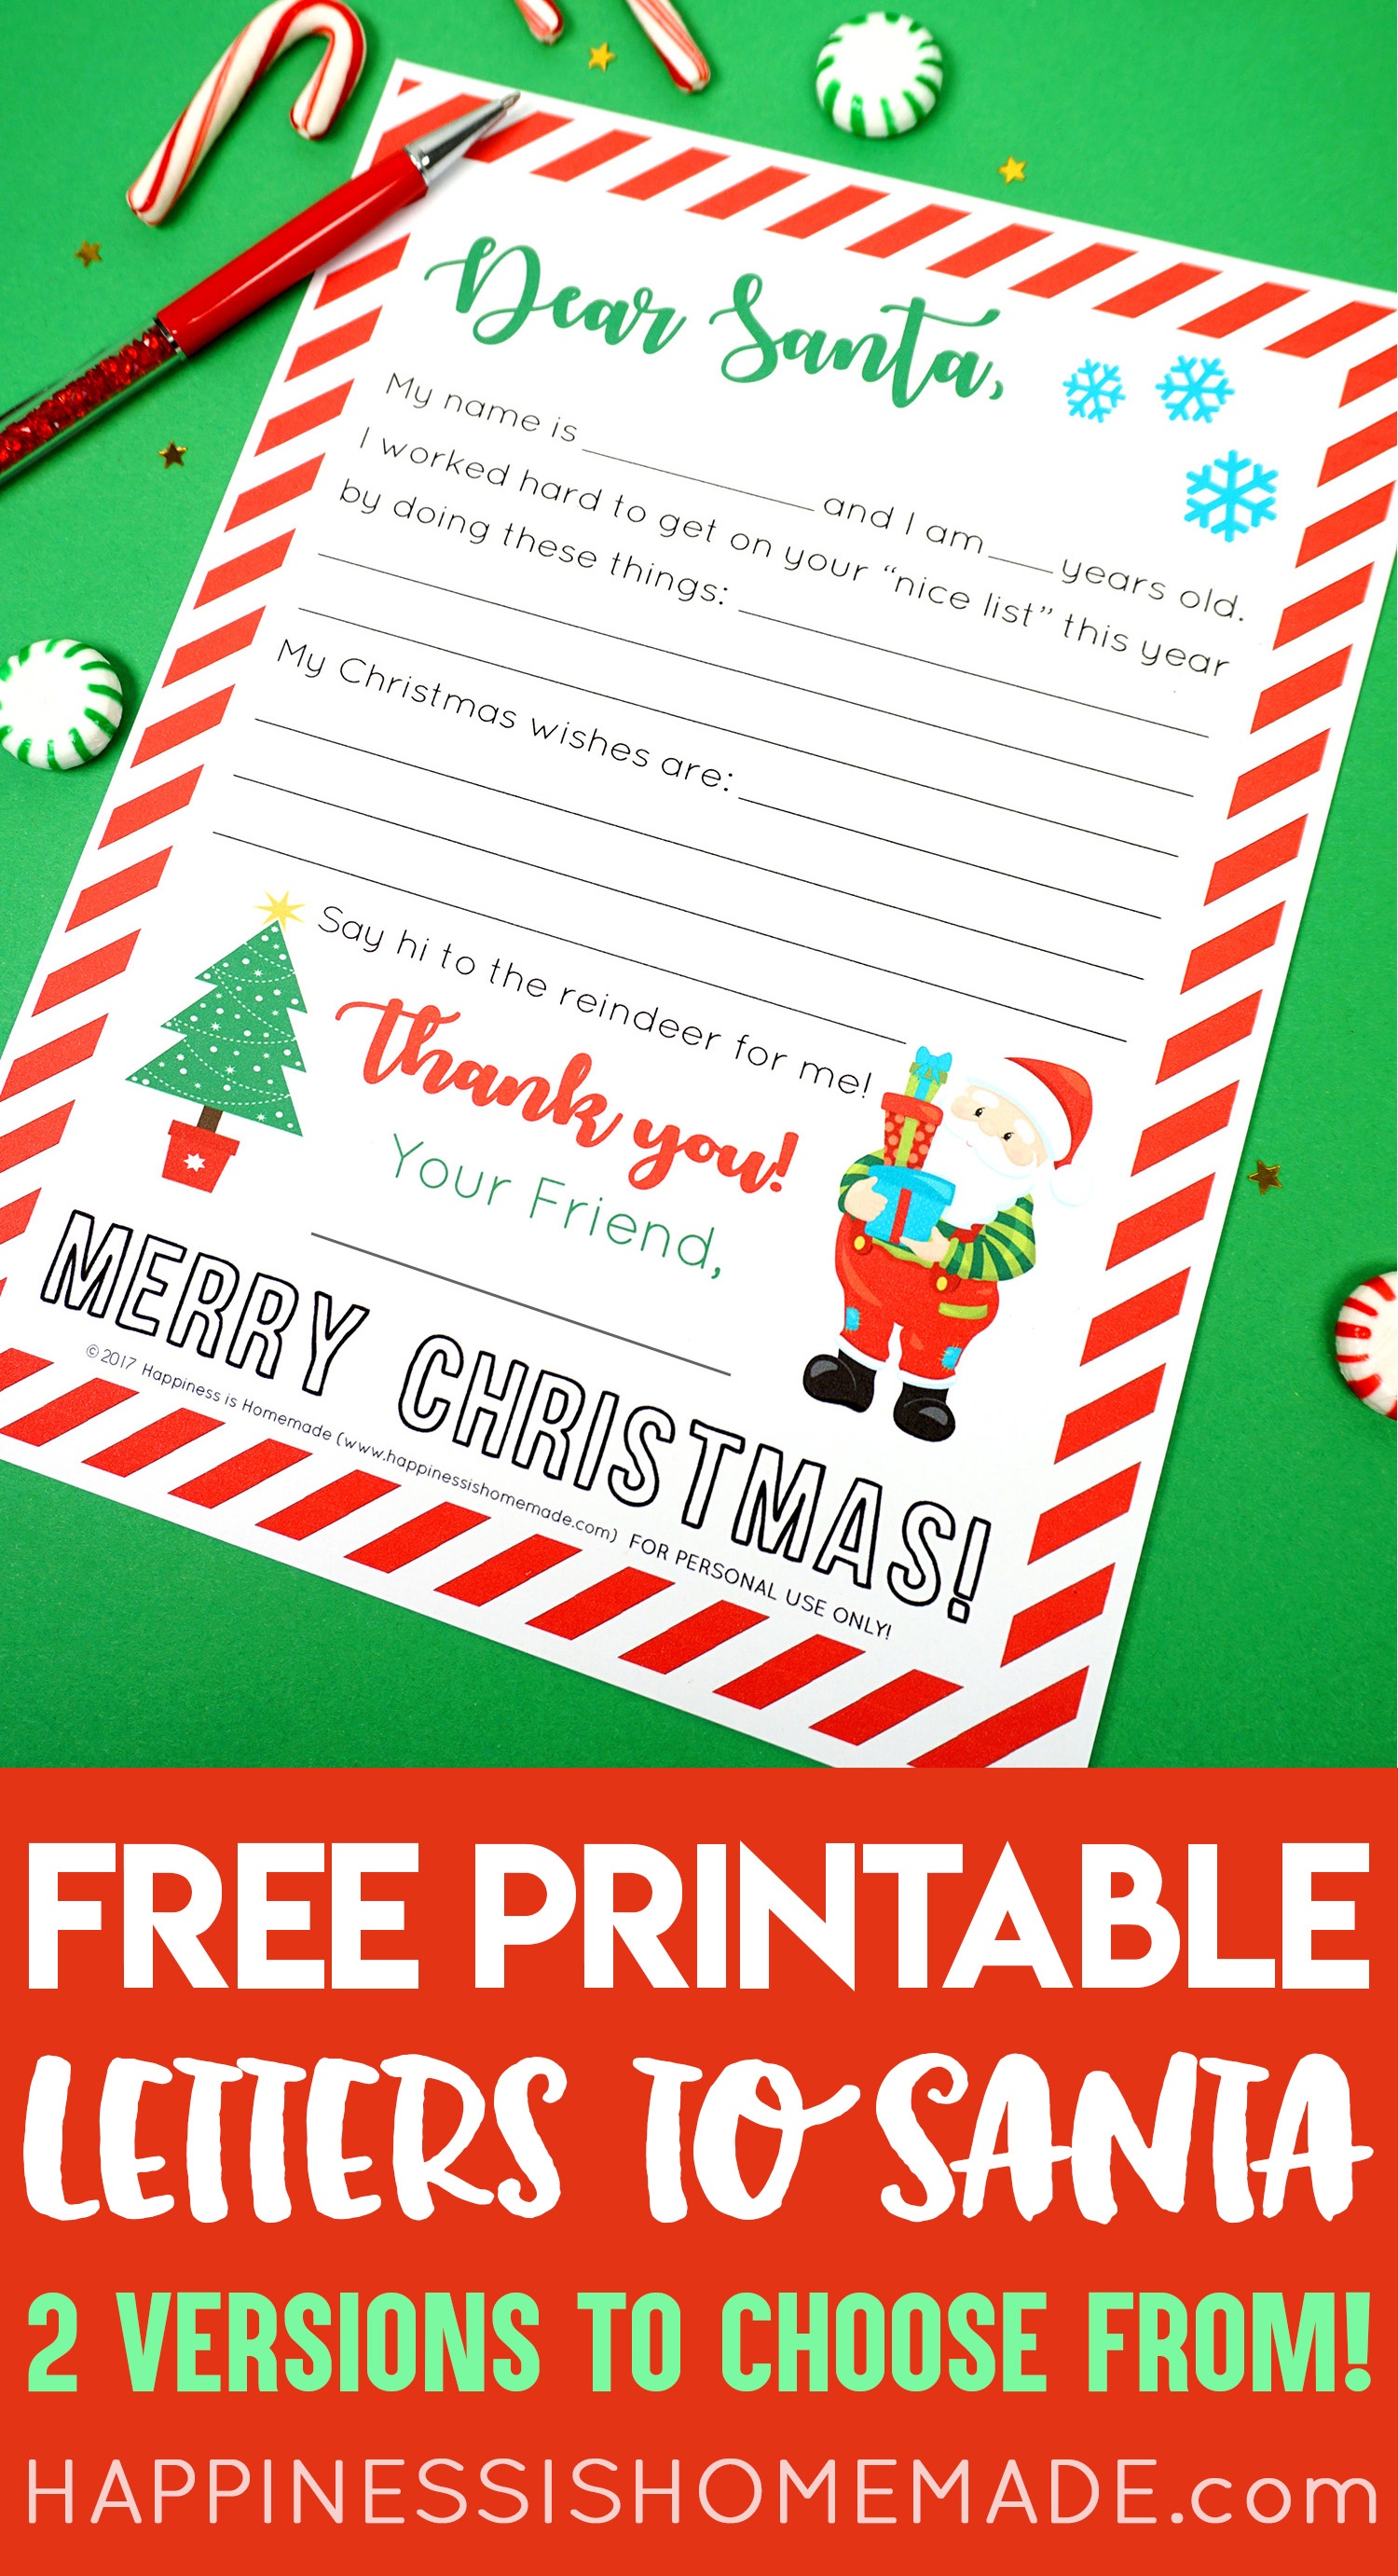 Free Printable Letter To Santa - Happiness Is Homemade - Free Printable Letters From Santa